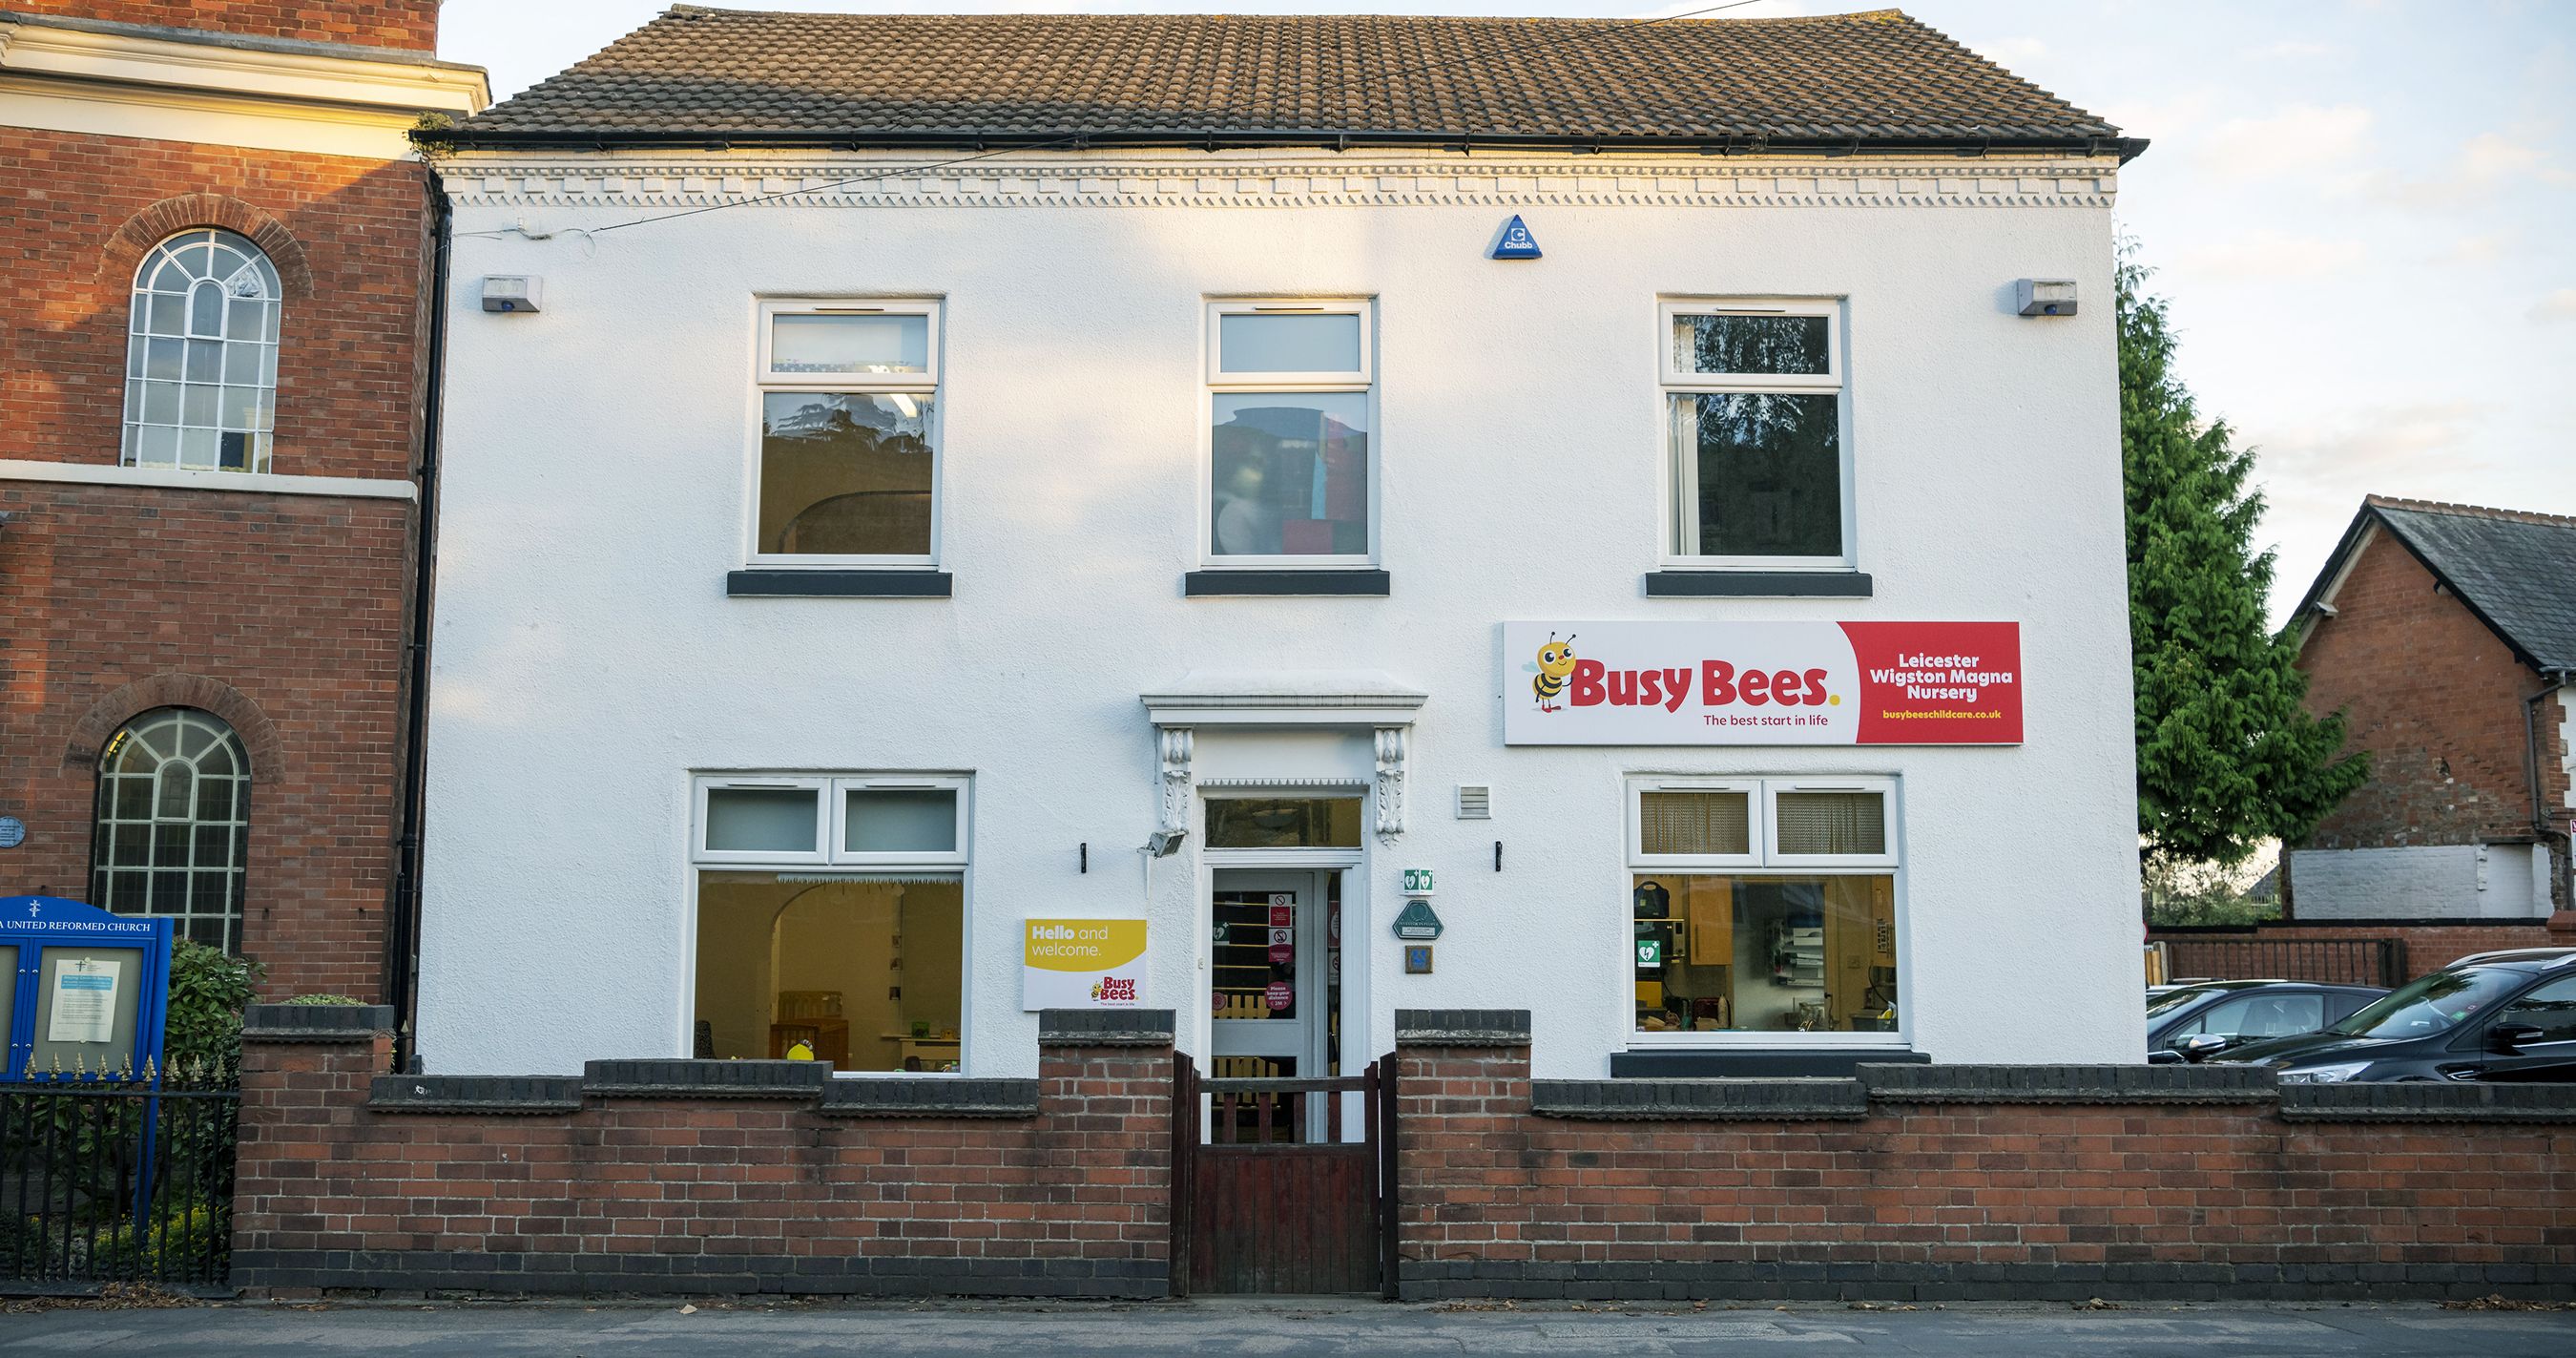 Images Busy Bees at Leicester Wigston Magna